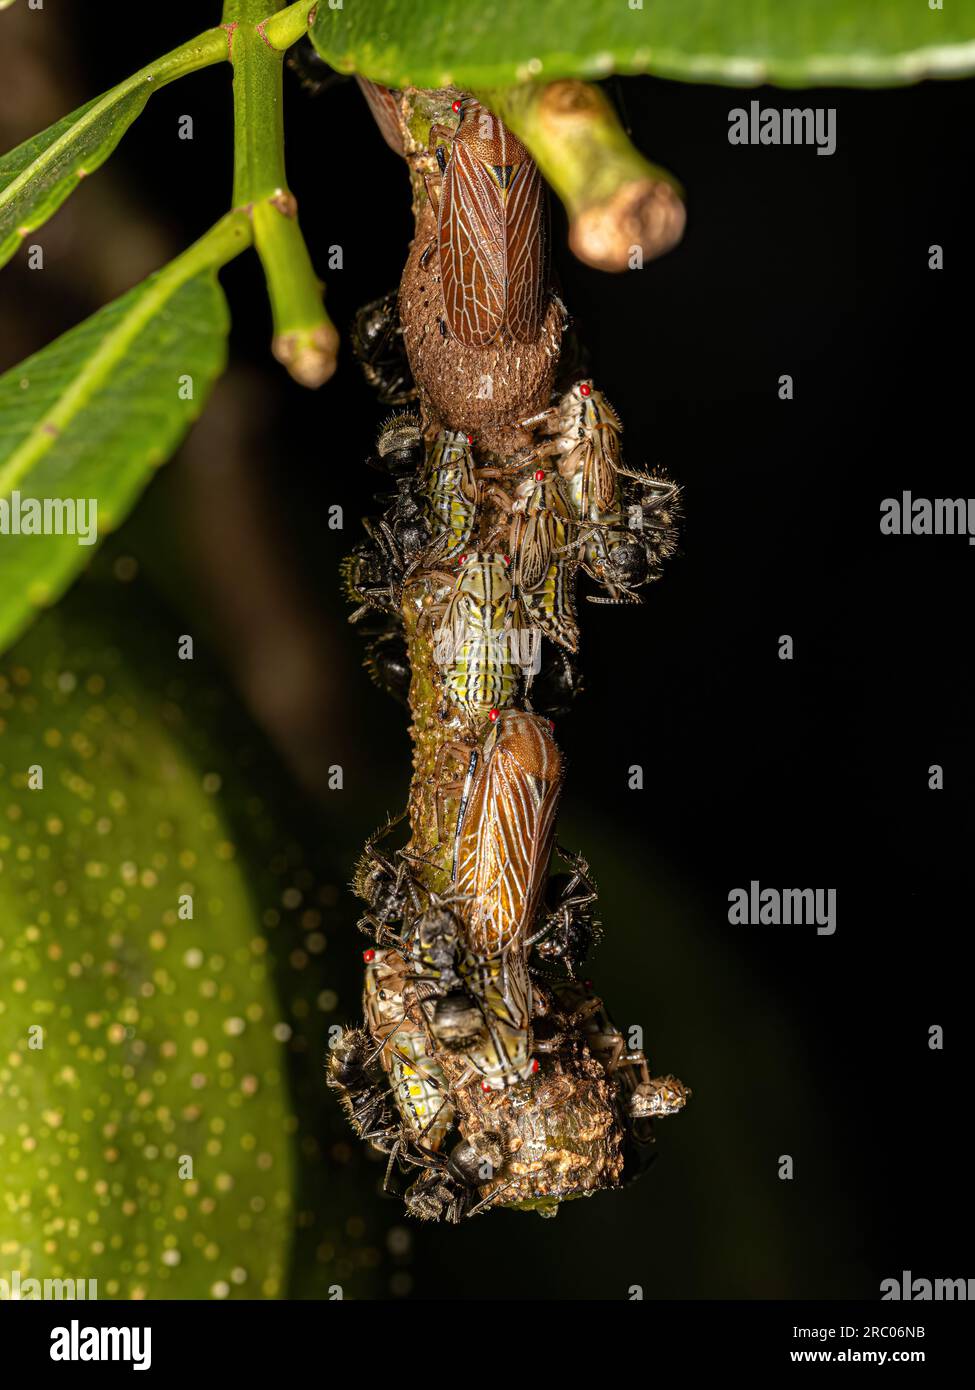 Aetalionid Treehopper Nymphs and Adults of the species Aetalion reticulatum and Adult Odorous Ants of the species Dolichoderus bispinosus Stock Photo